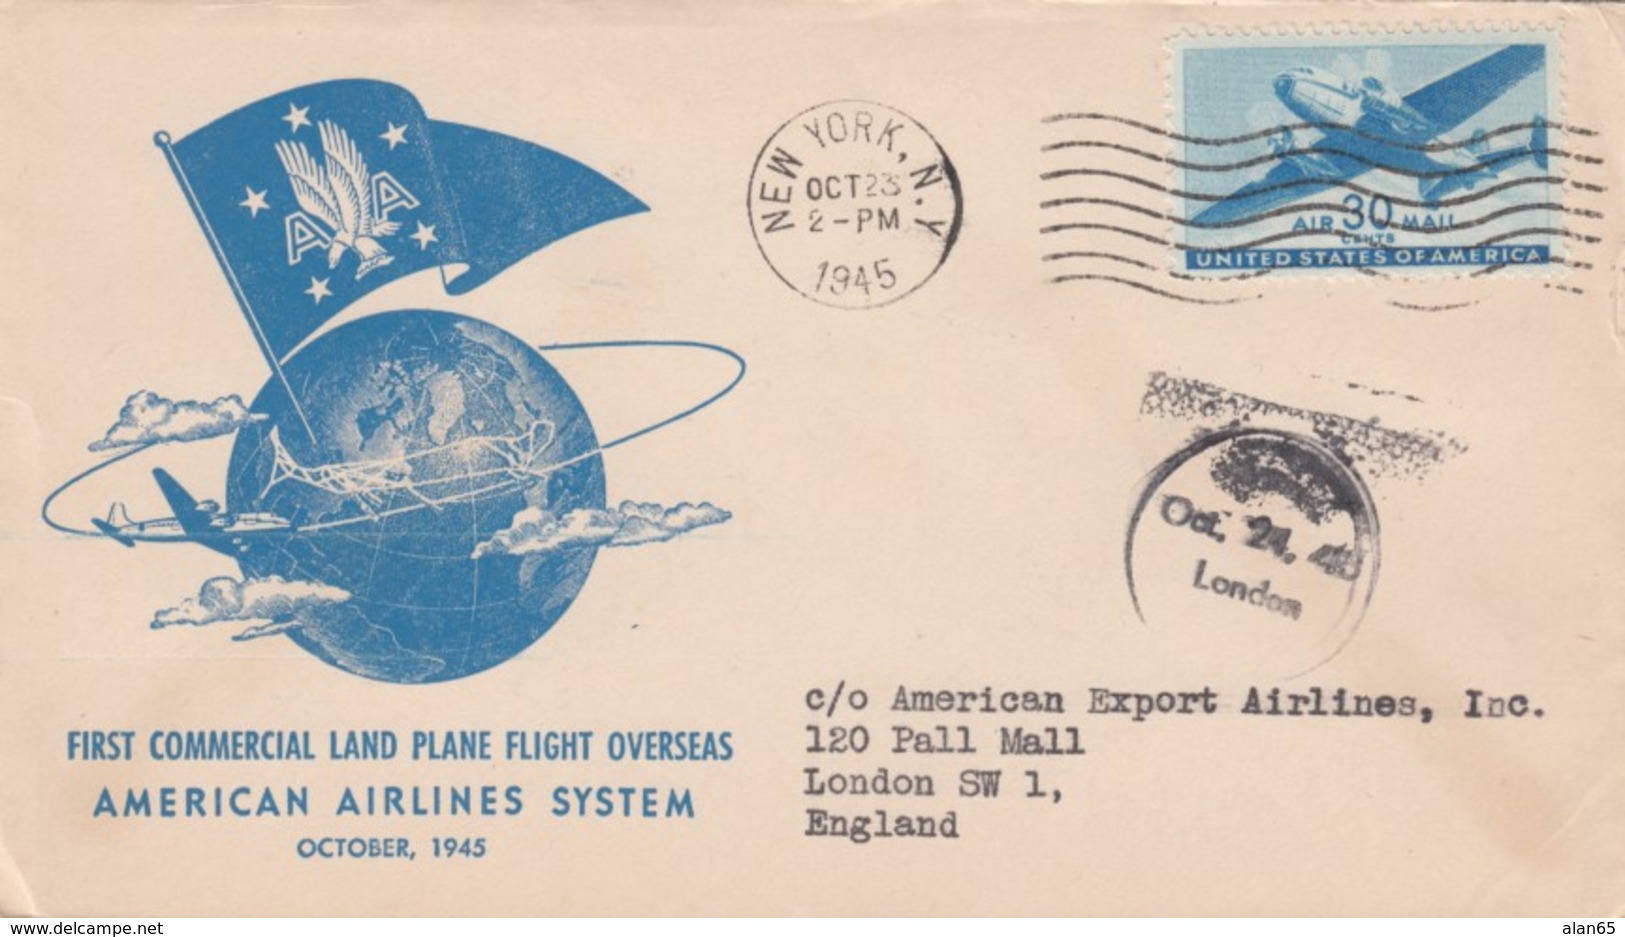 US Sc#C30 30c Issue 1st Commercial Land Plane Flight Overseas American Airlines, New York To London C1940s Vintage Cover - Event Covers